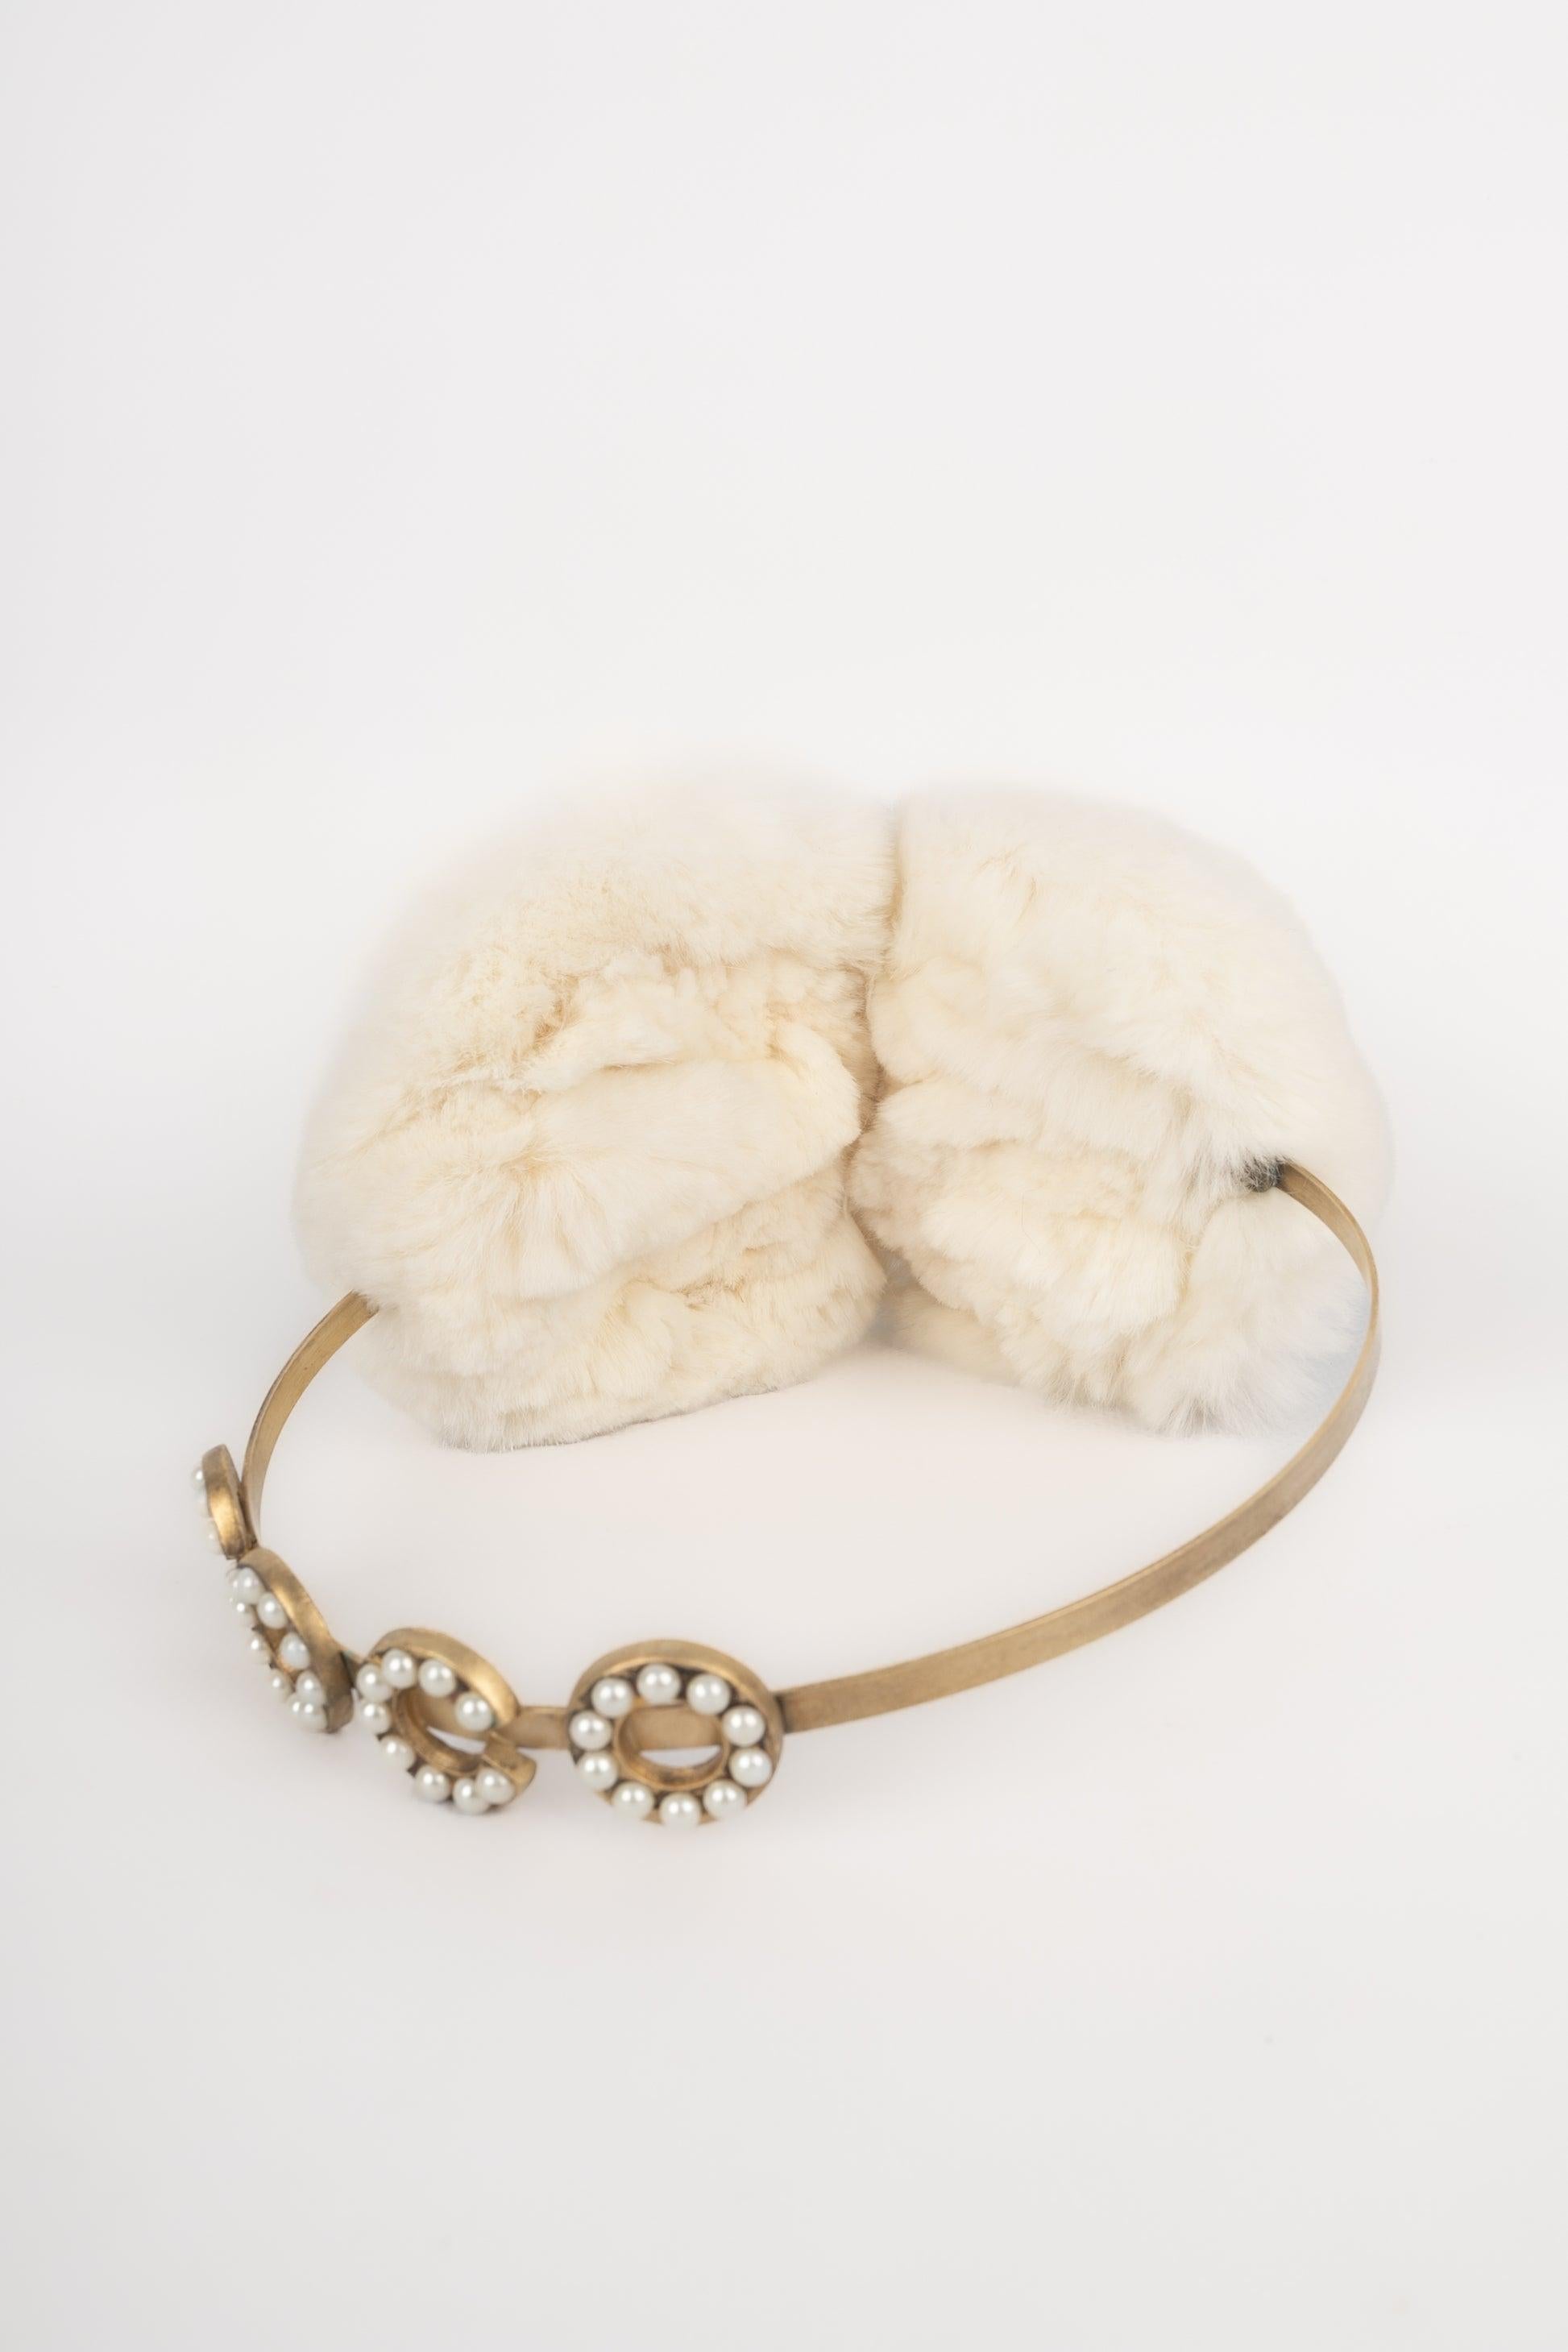 Chanel Fur Earmuffs with Golden Metal Ring and Costume Pearls, 2001 For Sale 1